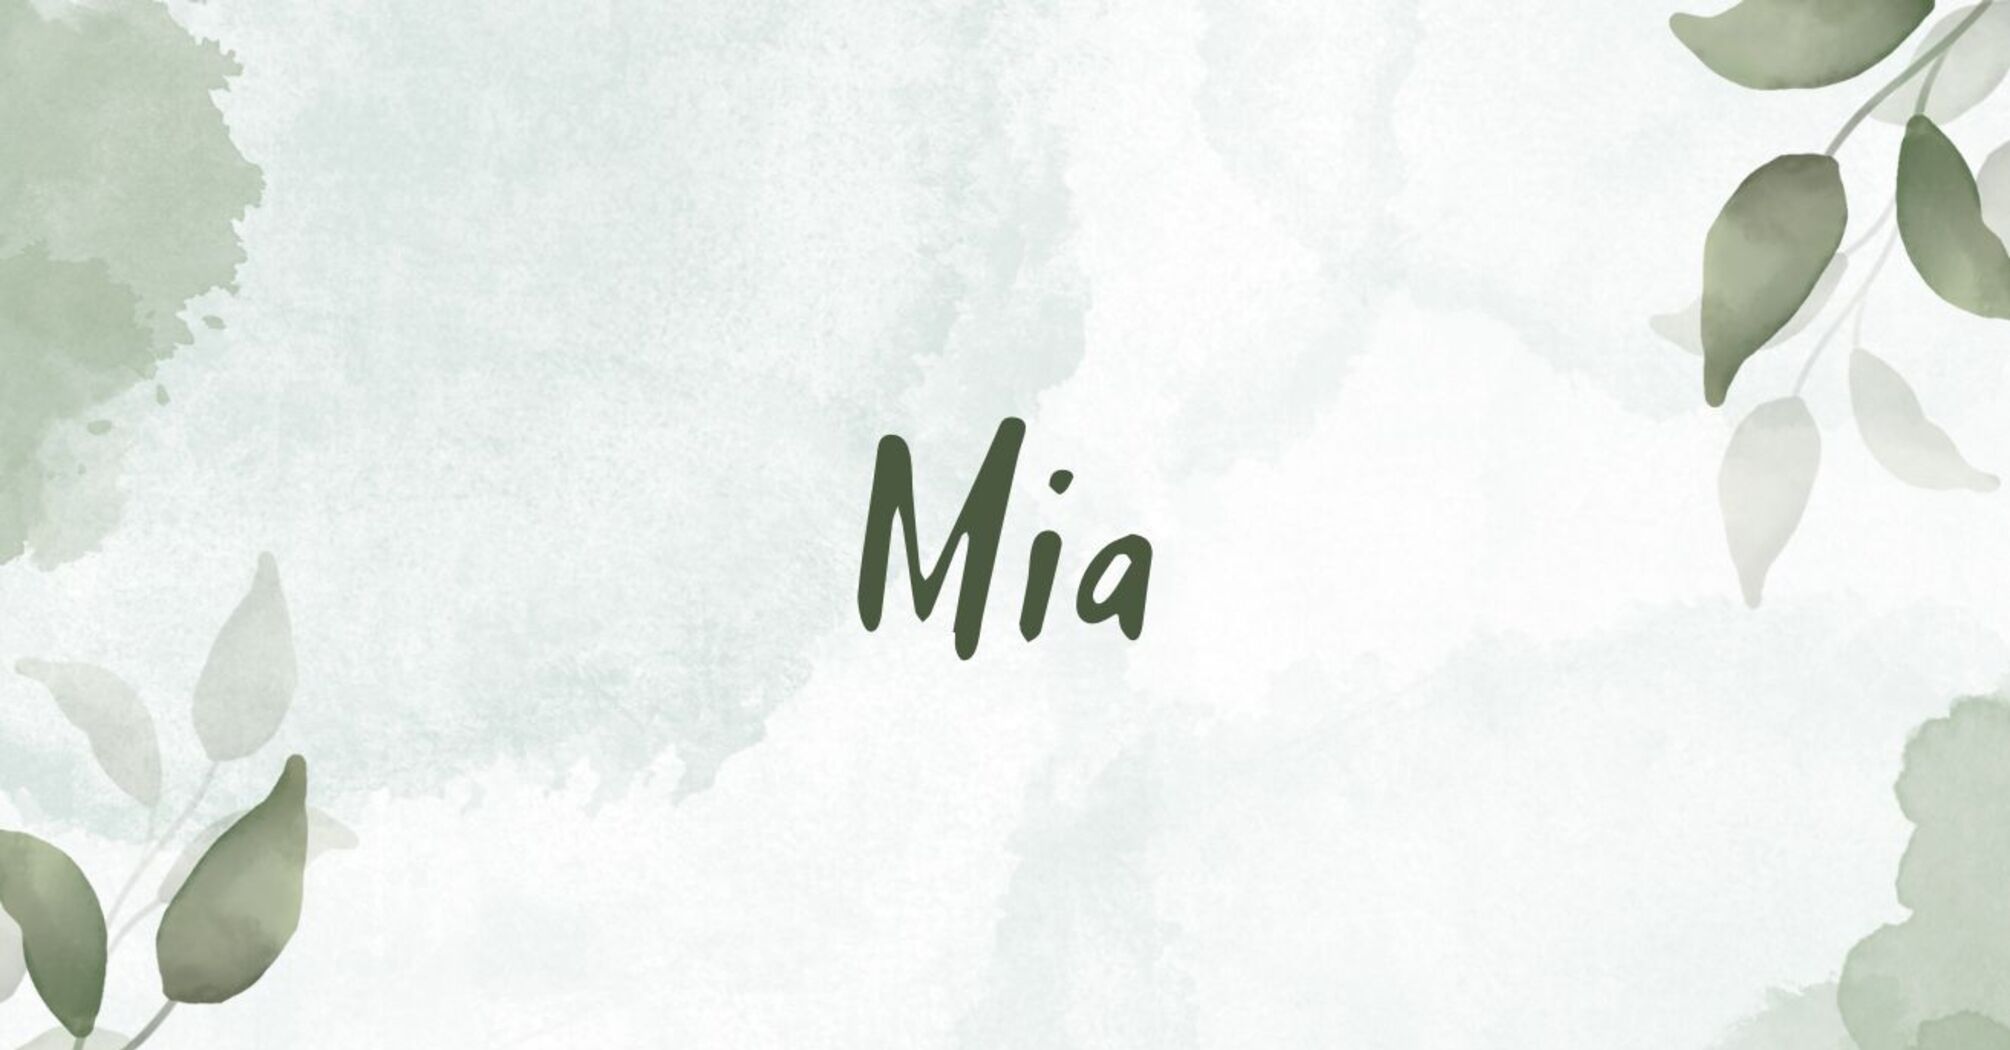 Meaning of the name Mia